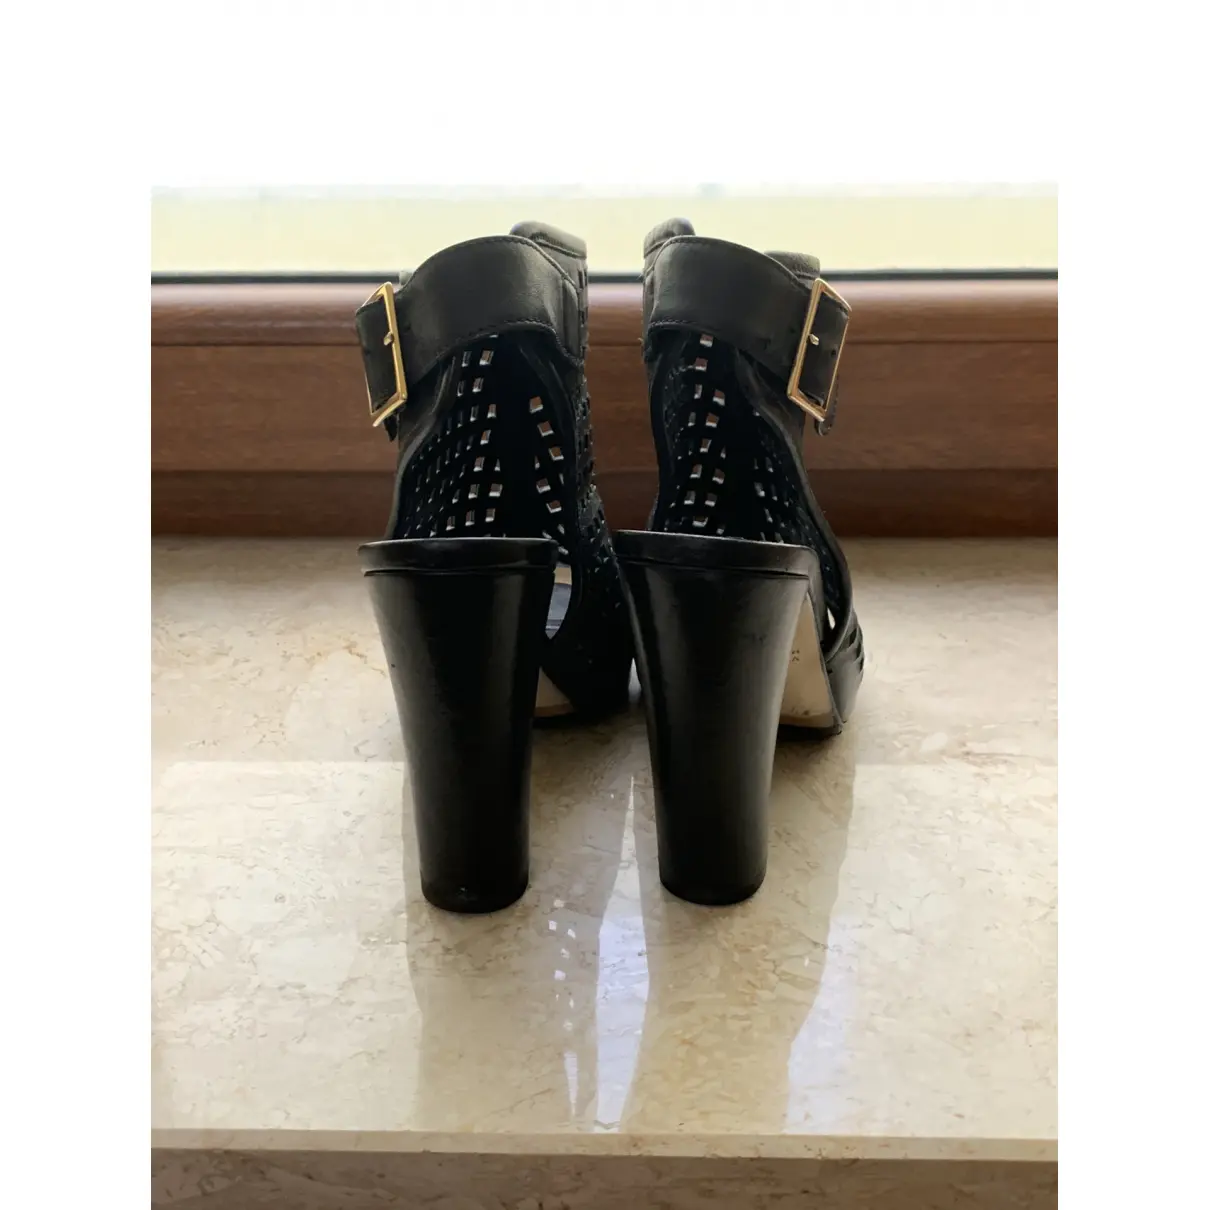 Buy Guido Sgariglia Leather sandals online